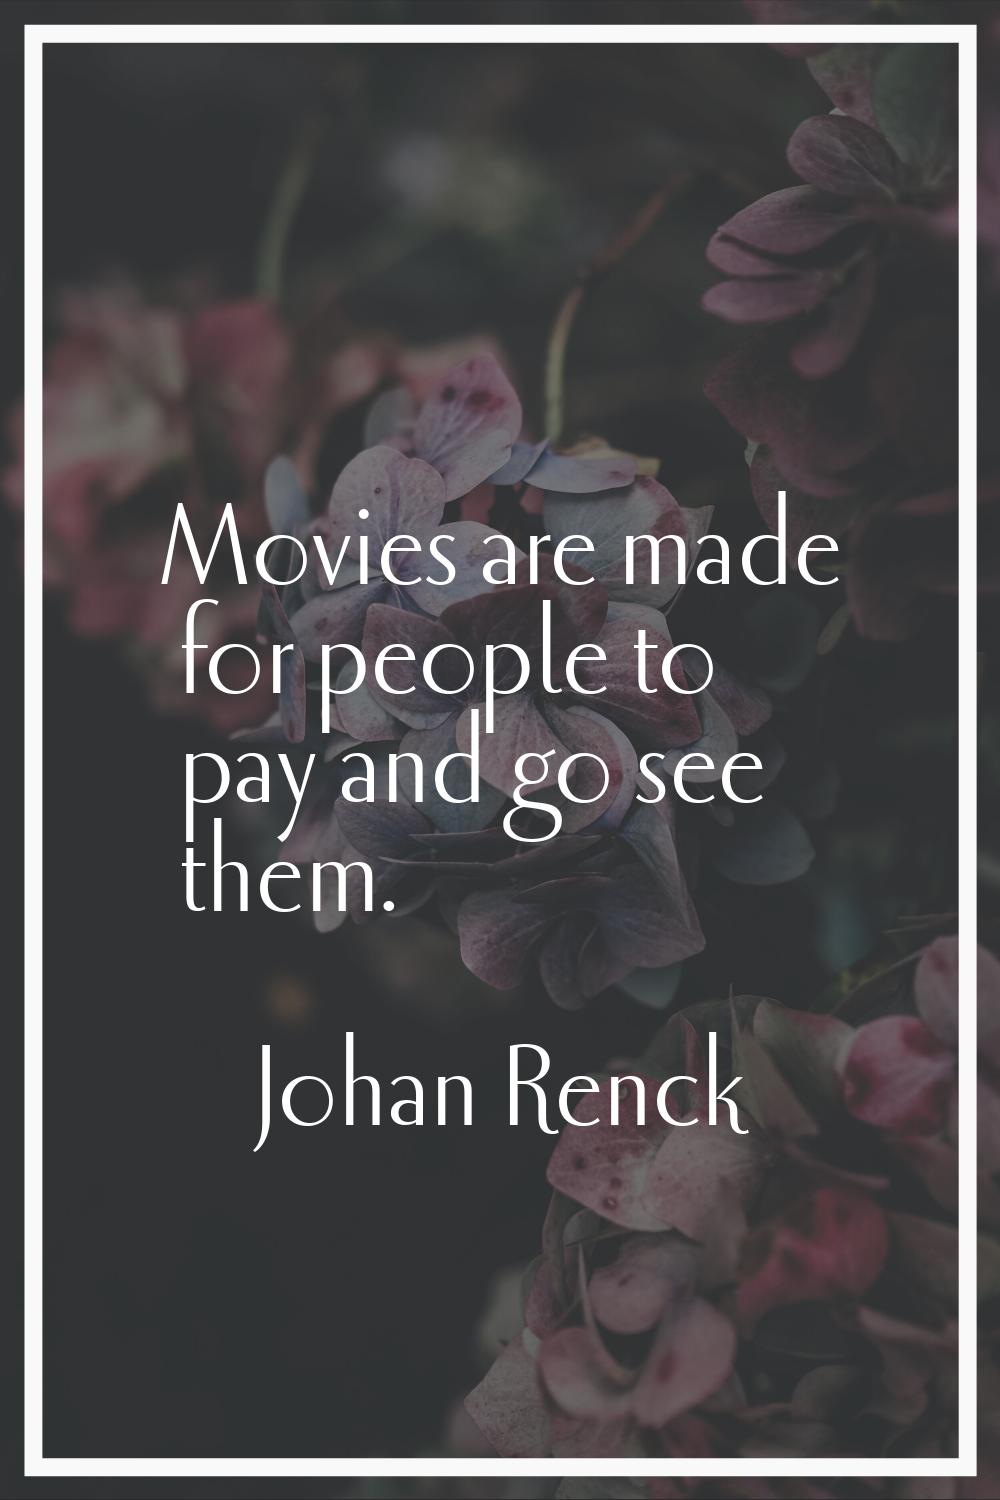 Movies are made for people to pay and go see them.